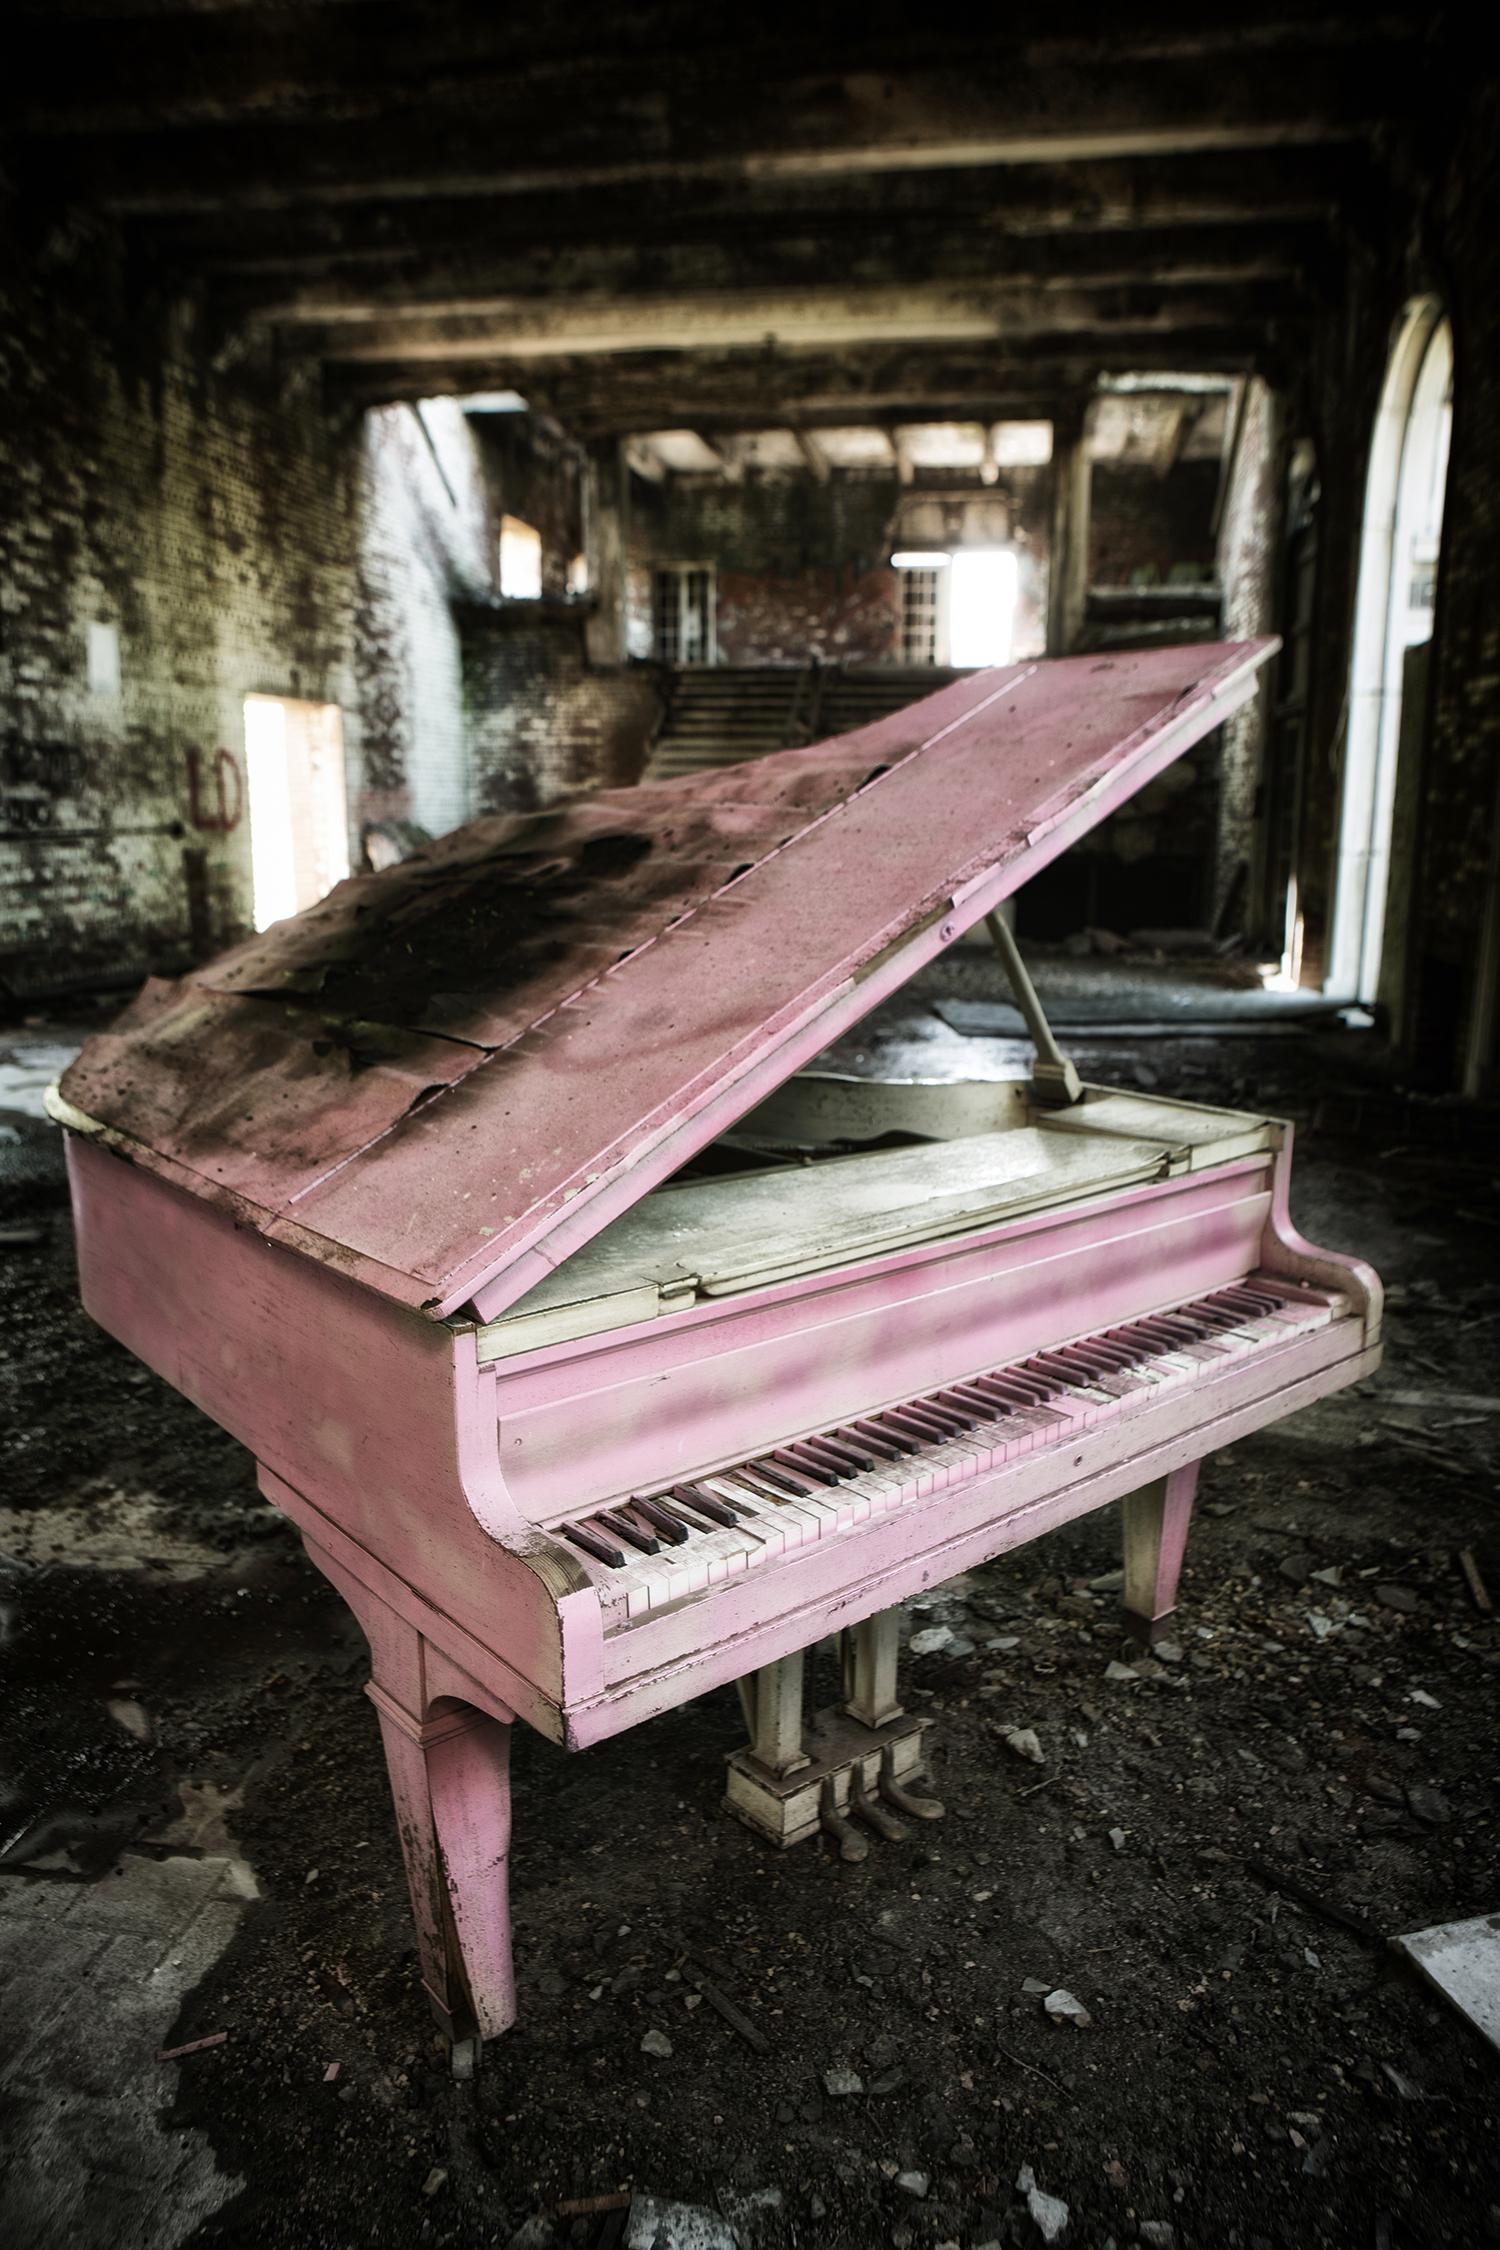 "Concluded", contemporary, abandoned, piano, pink, music, color photograph - Photograph by Rebecca Skinner